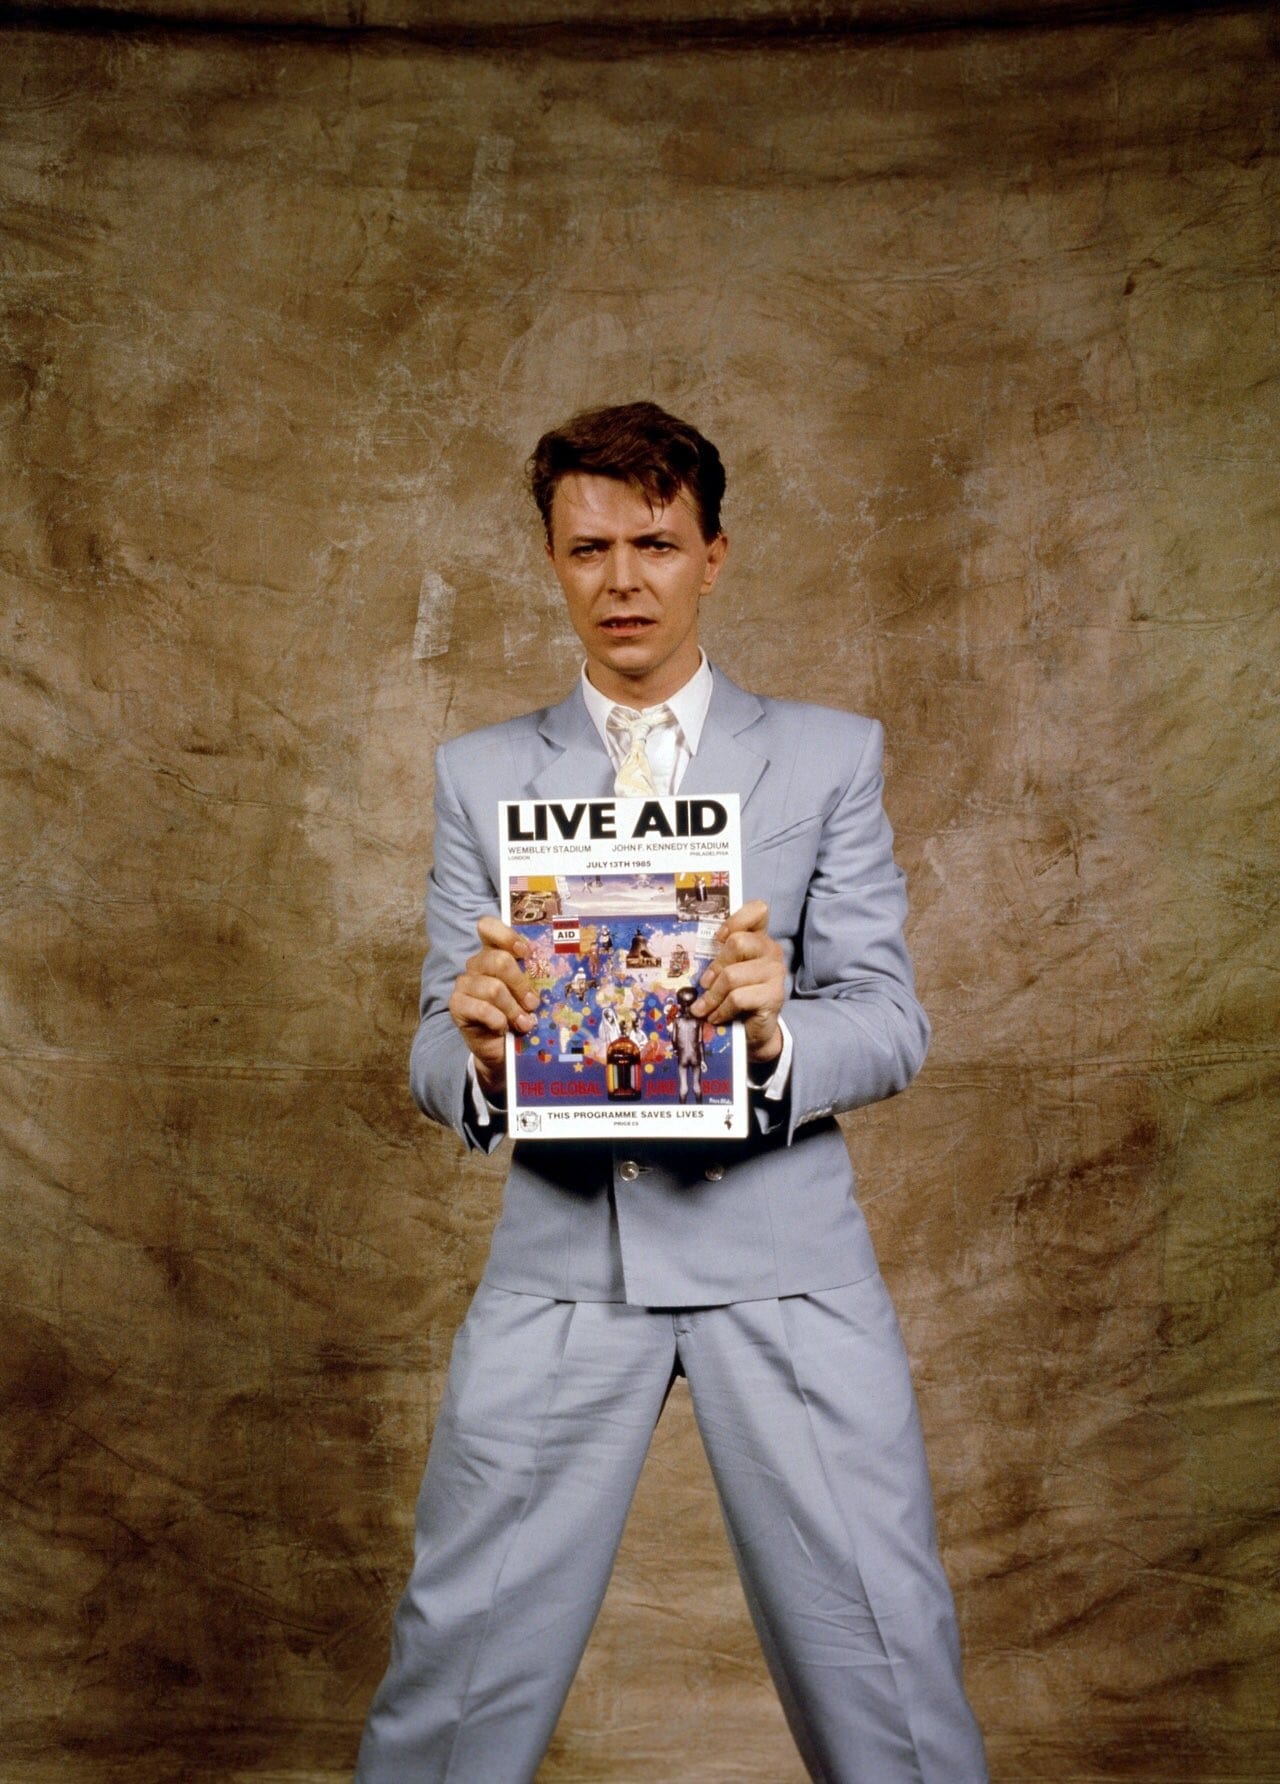 David Bowie at Live Aid